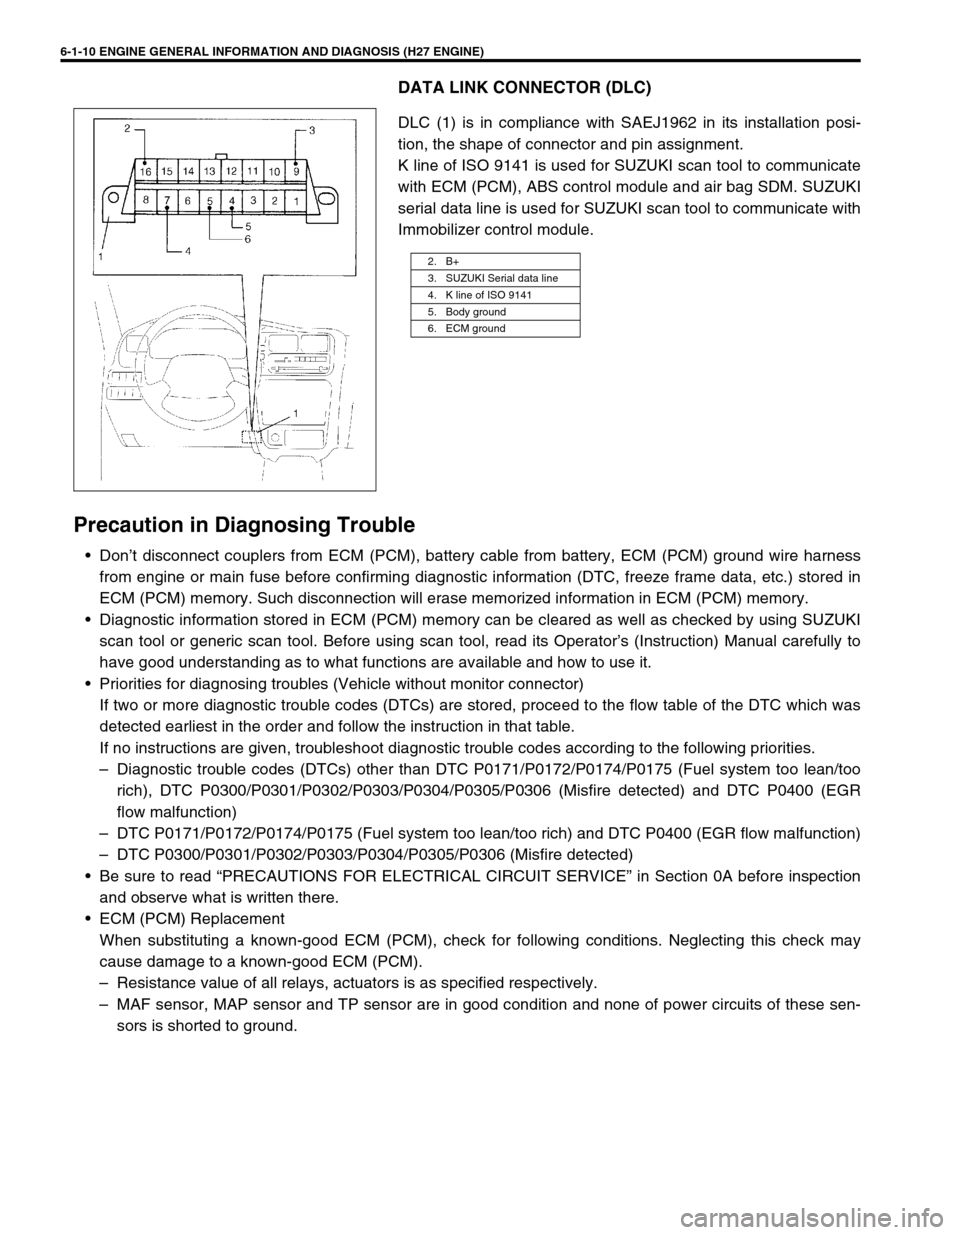 SUZUKI GRAND VITARA 2001 2.G Service Manual 6-1-10 ENGINE GENERAL INFORMATION AND DIAGNOSIS (H27 ENGINE)
DATA LINK CONNECTOR (DLC)
DLC (1) is in compliance with SAEJ1962 in its installation posi-
tion, the shape of connector and pin assignment.